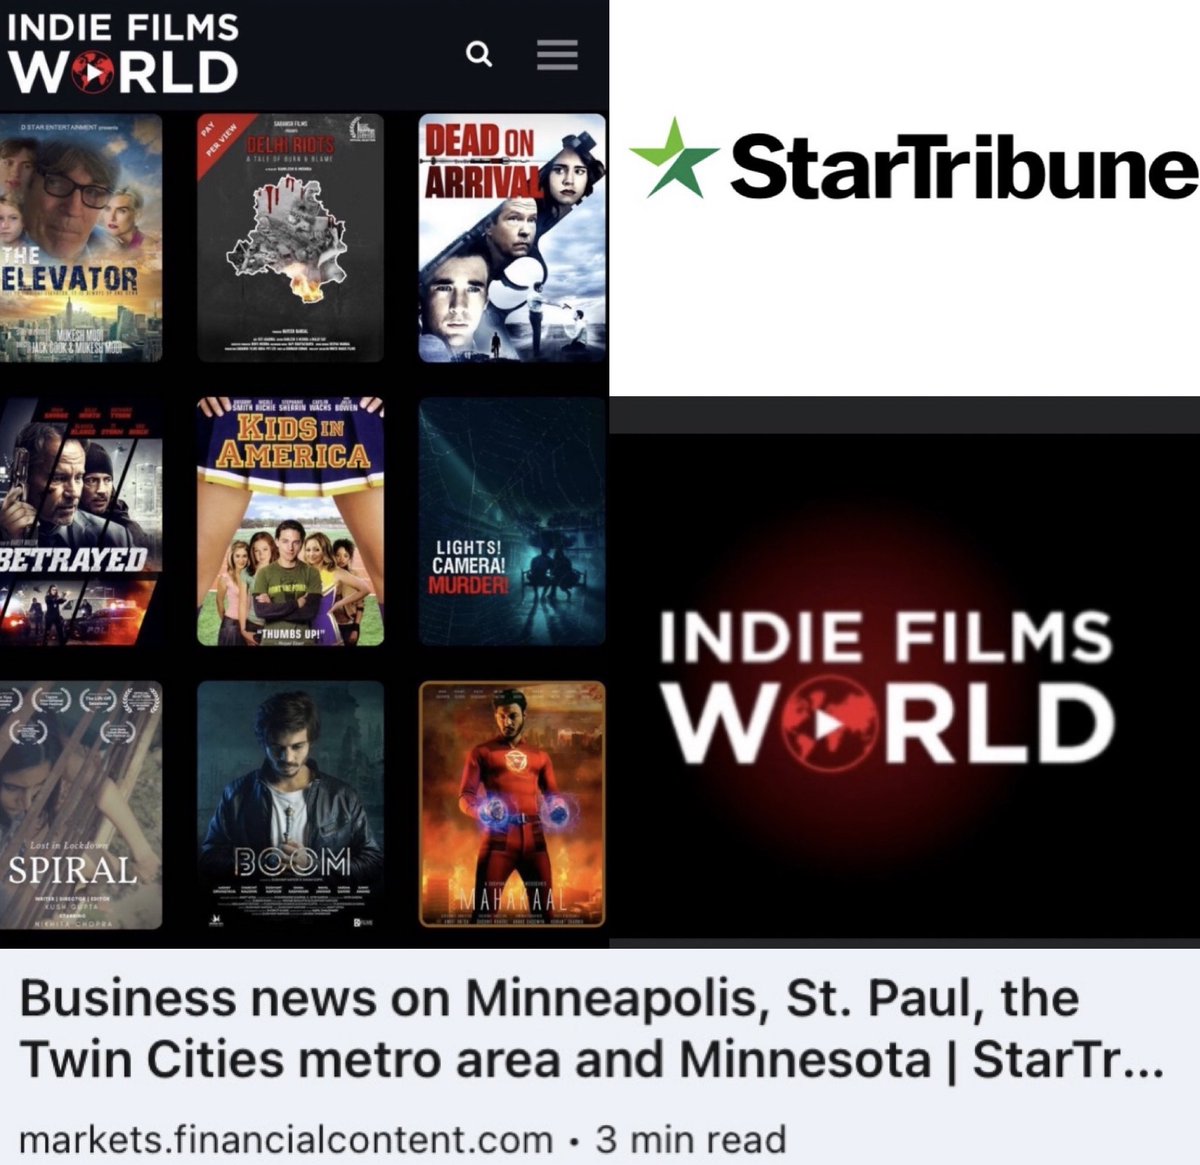 @StarTribune: #Filmmaker @realmukeshmodi Launches a #Streaming #Platform for #Independent #Filmmakers – @indiefilmsworld – that Catapults Opportunity to Place & Watch a Variety of Top-Rated #Films & #TV indiefilmsworld.com #RDC #RuthDavisConsultingLLC markets.financialcontent.com/startribune/ar…